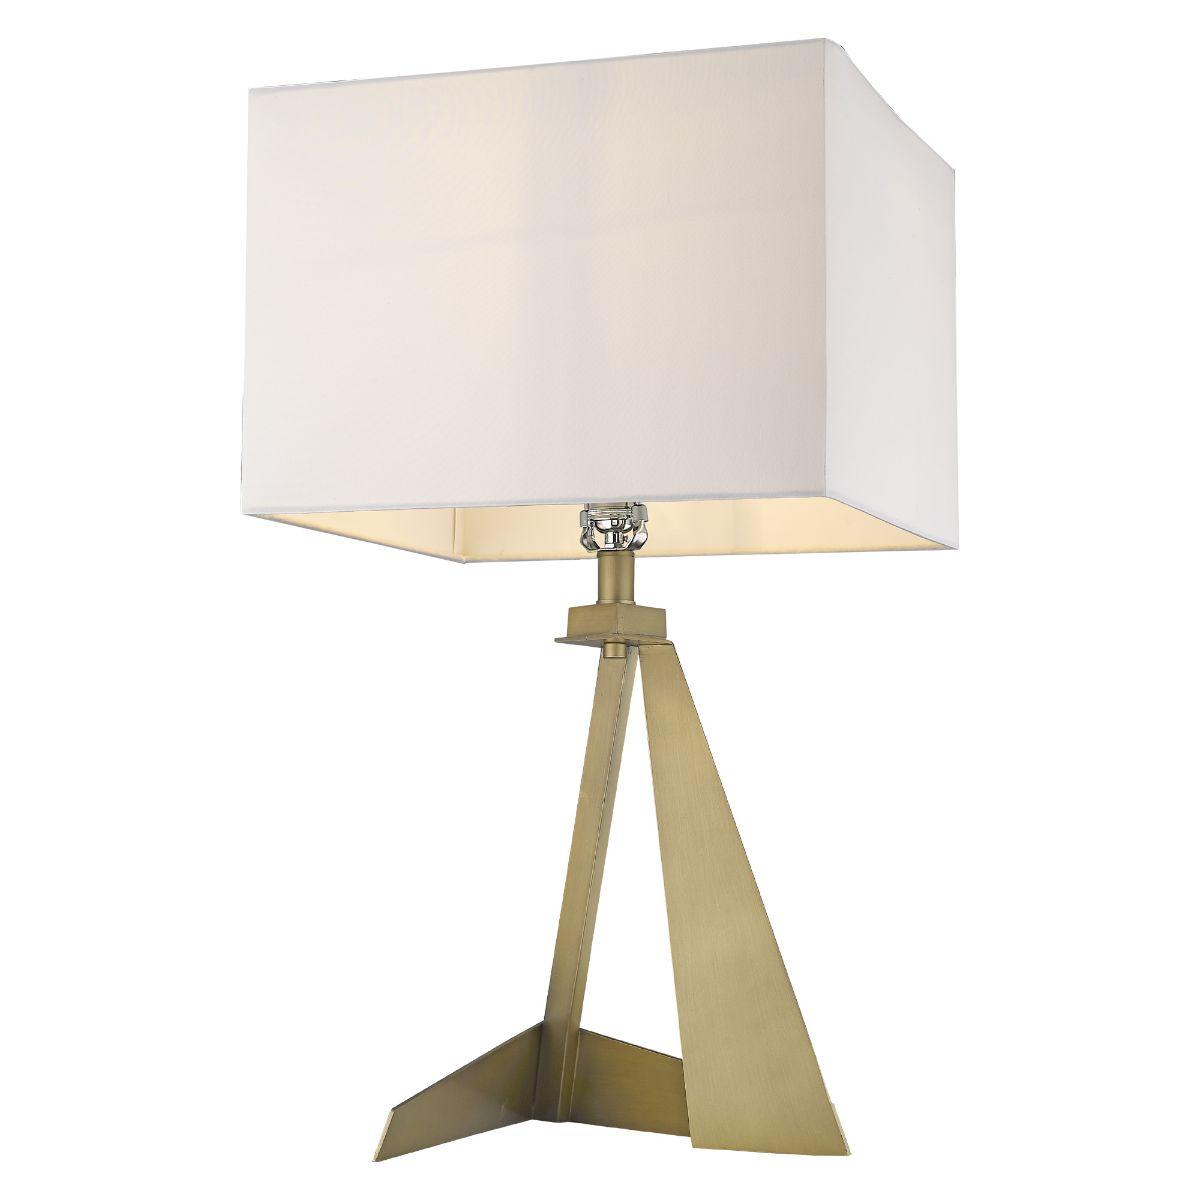 Stratos 1 Light Table Lamp Aged Brass Finish